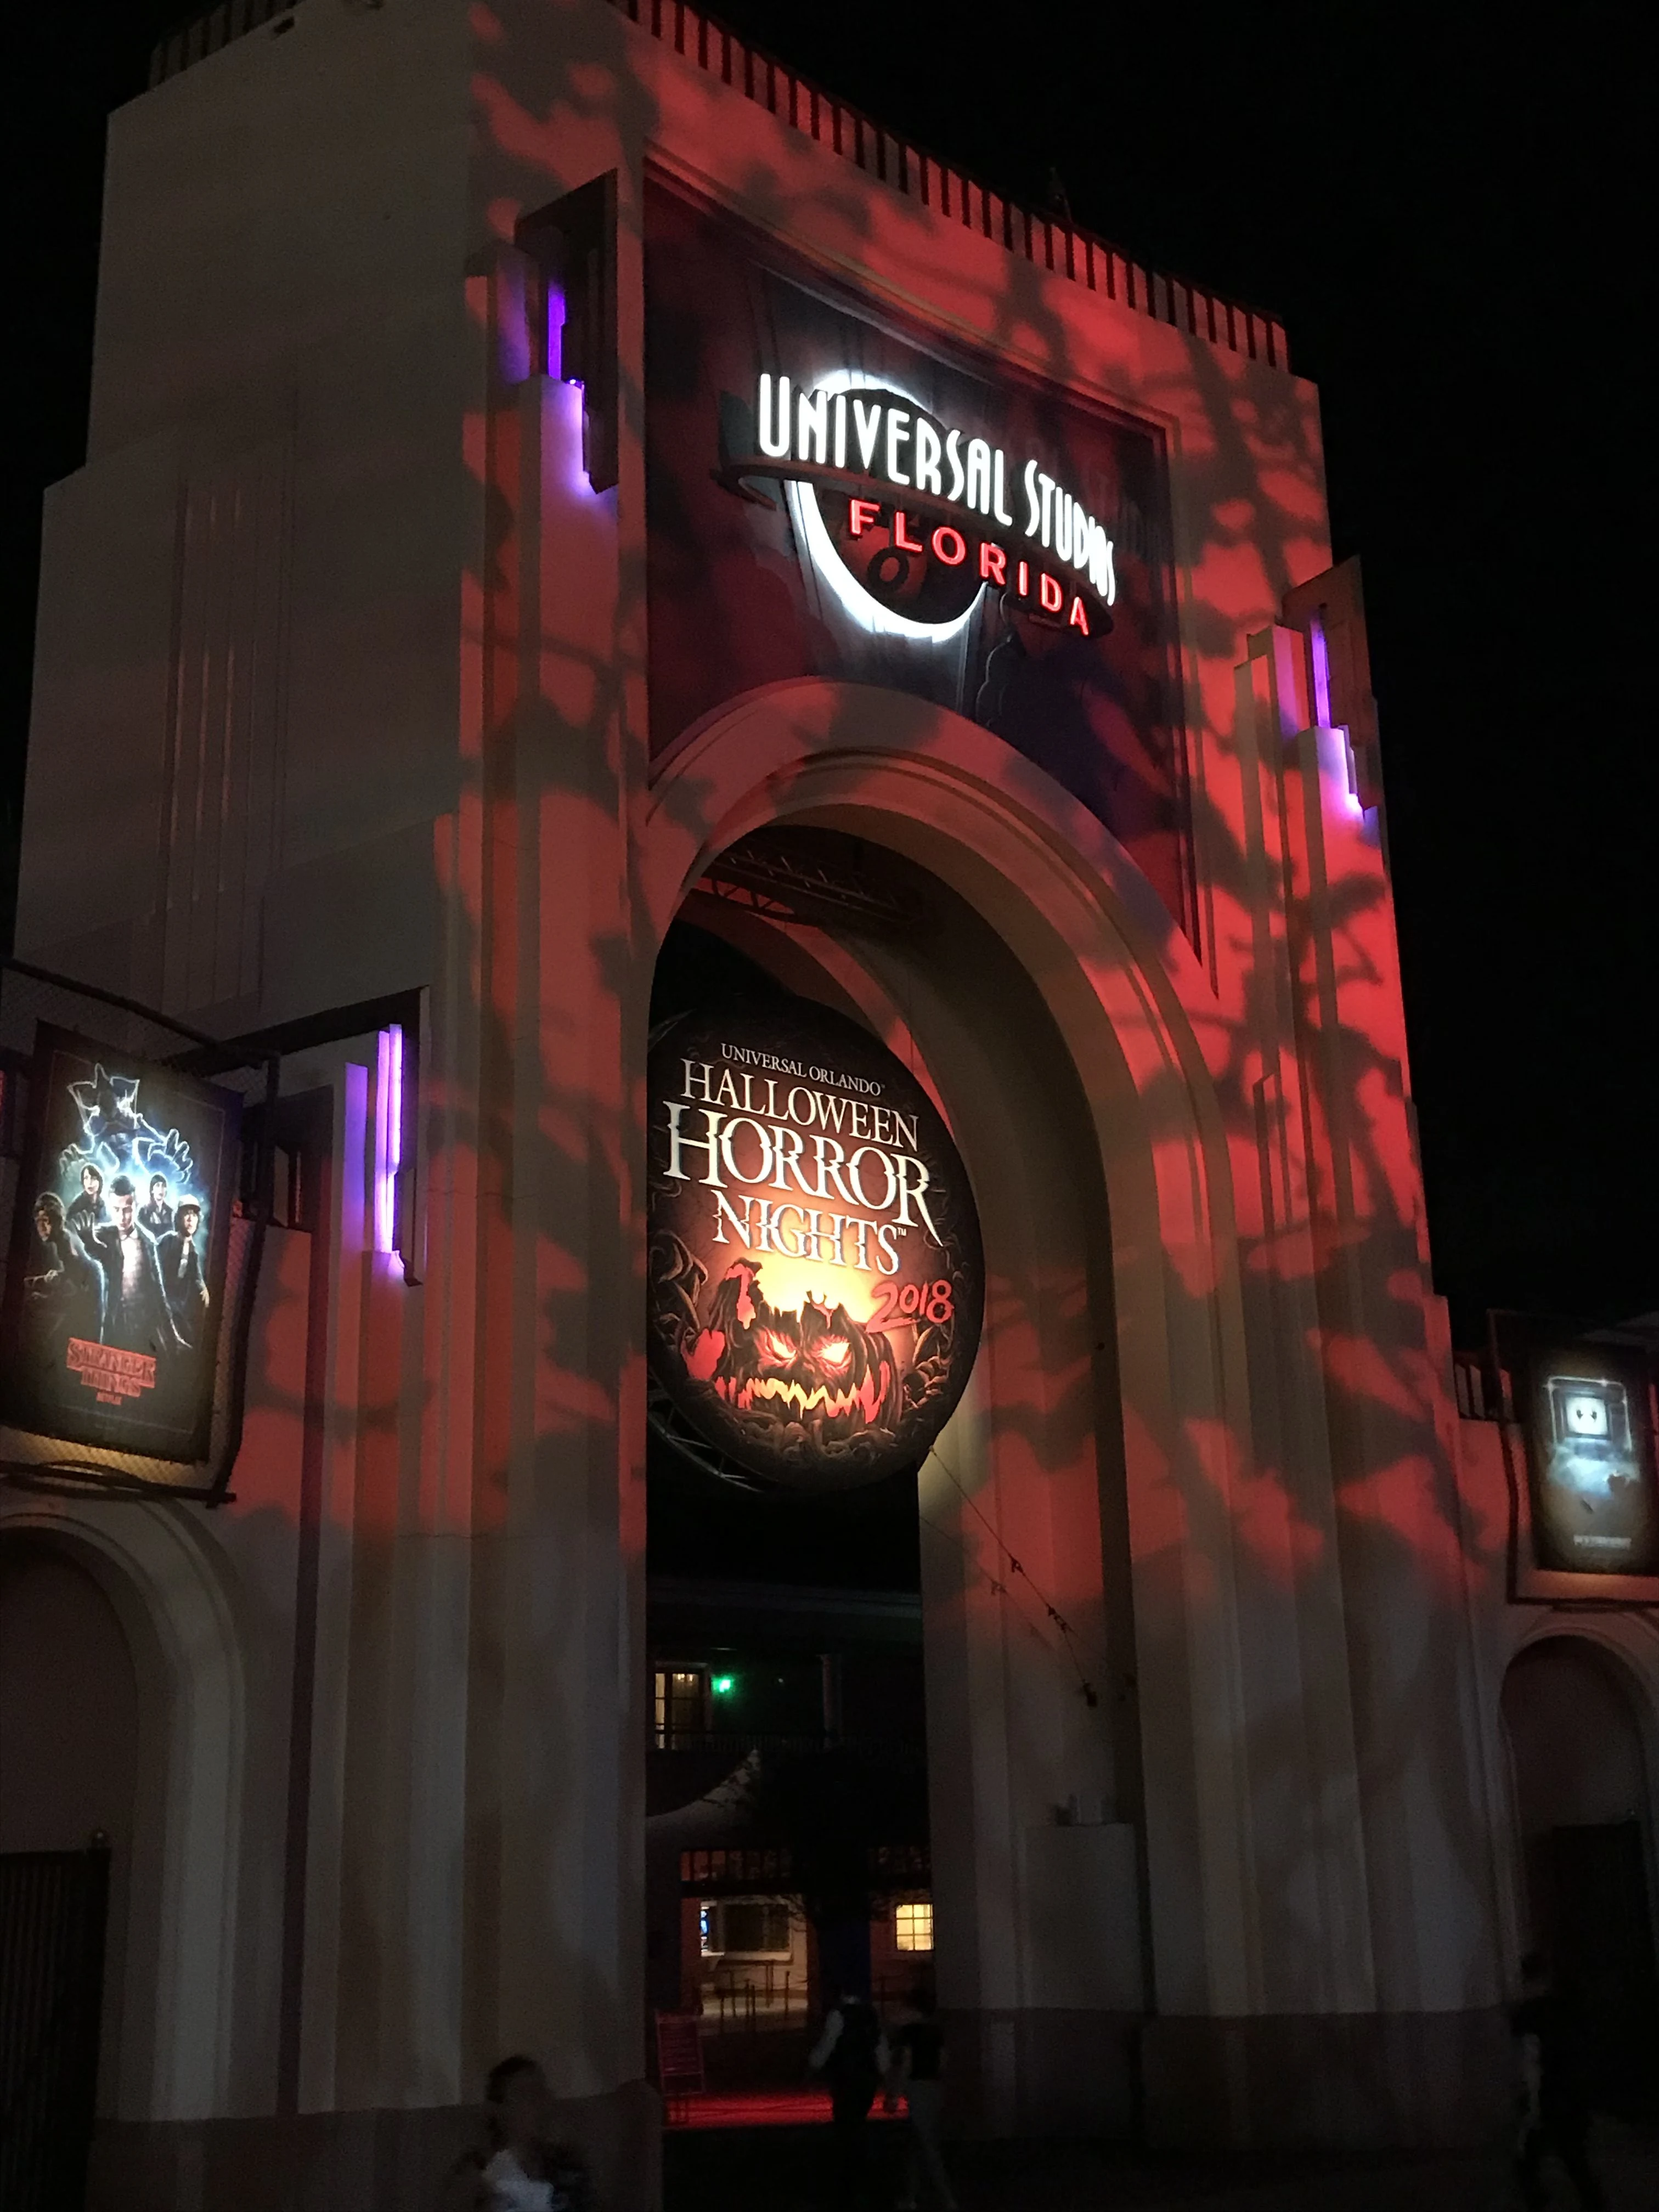 Parent's Guide To Halloween Horror Nights, Halloween Horror Nights, Universal Halloween Horror Nights